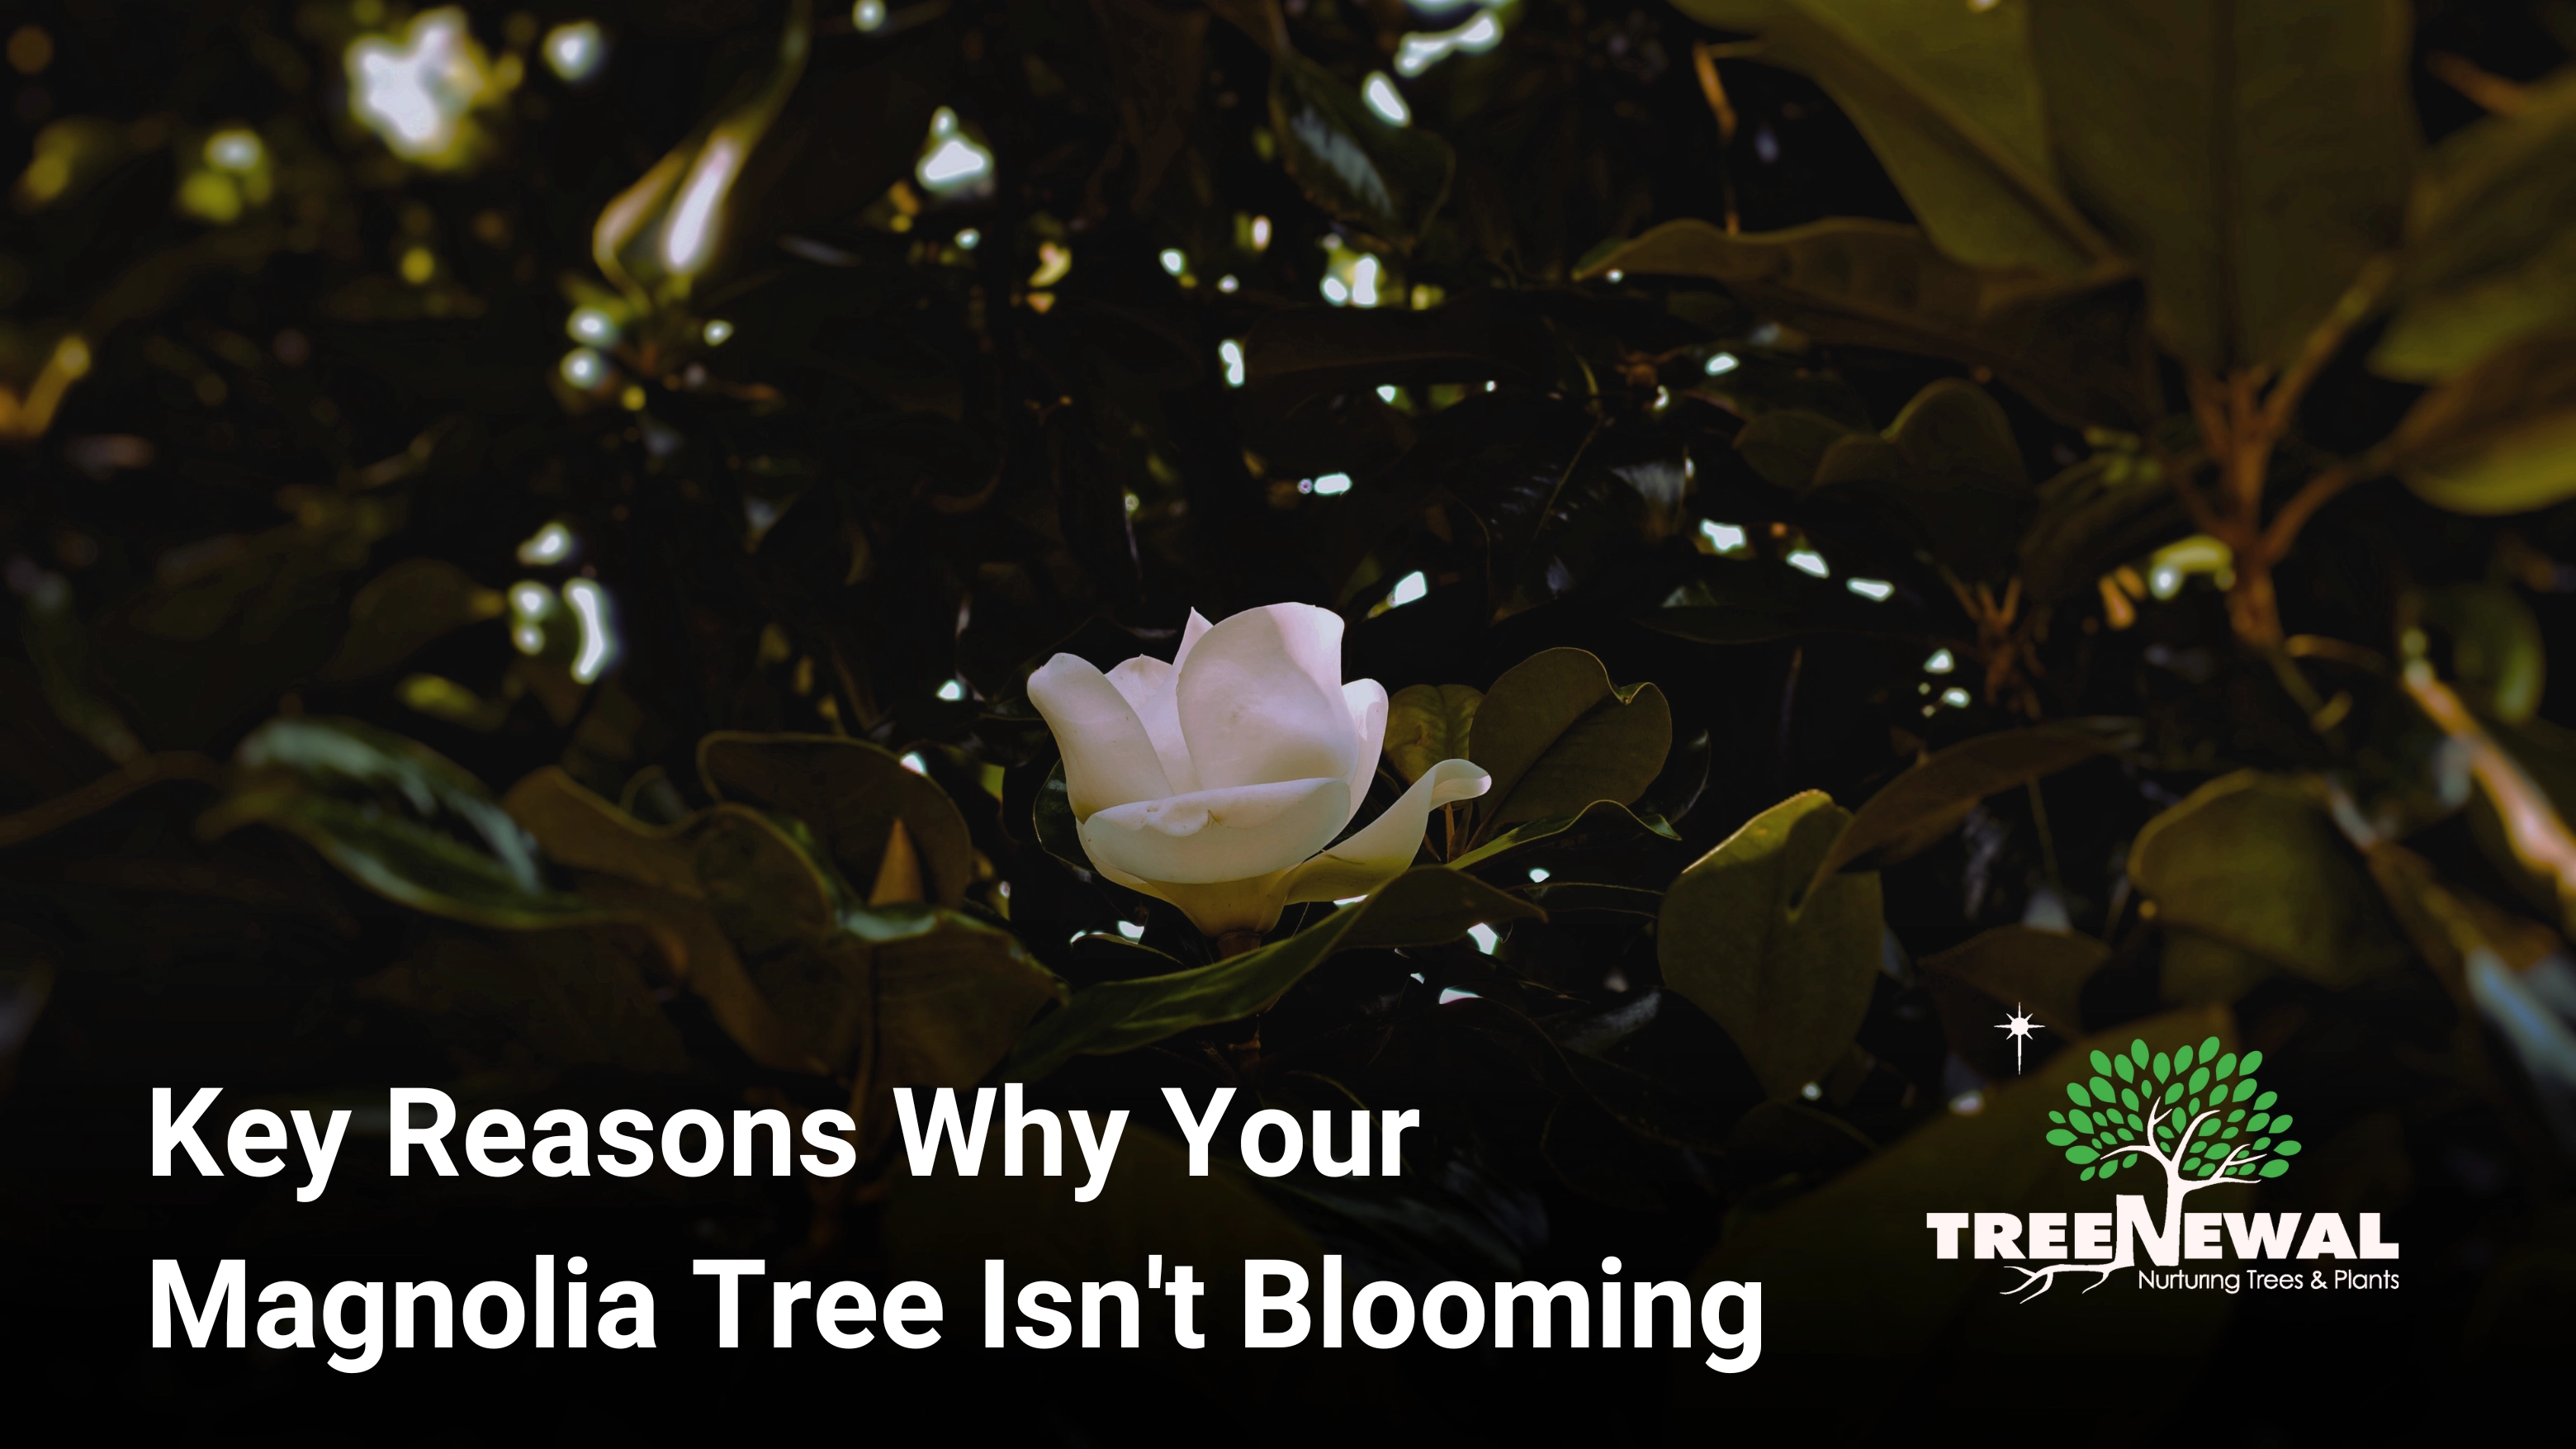 Key Reasons Why Your Magnolia Tree Isn’t Blooming